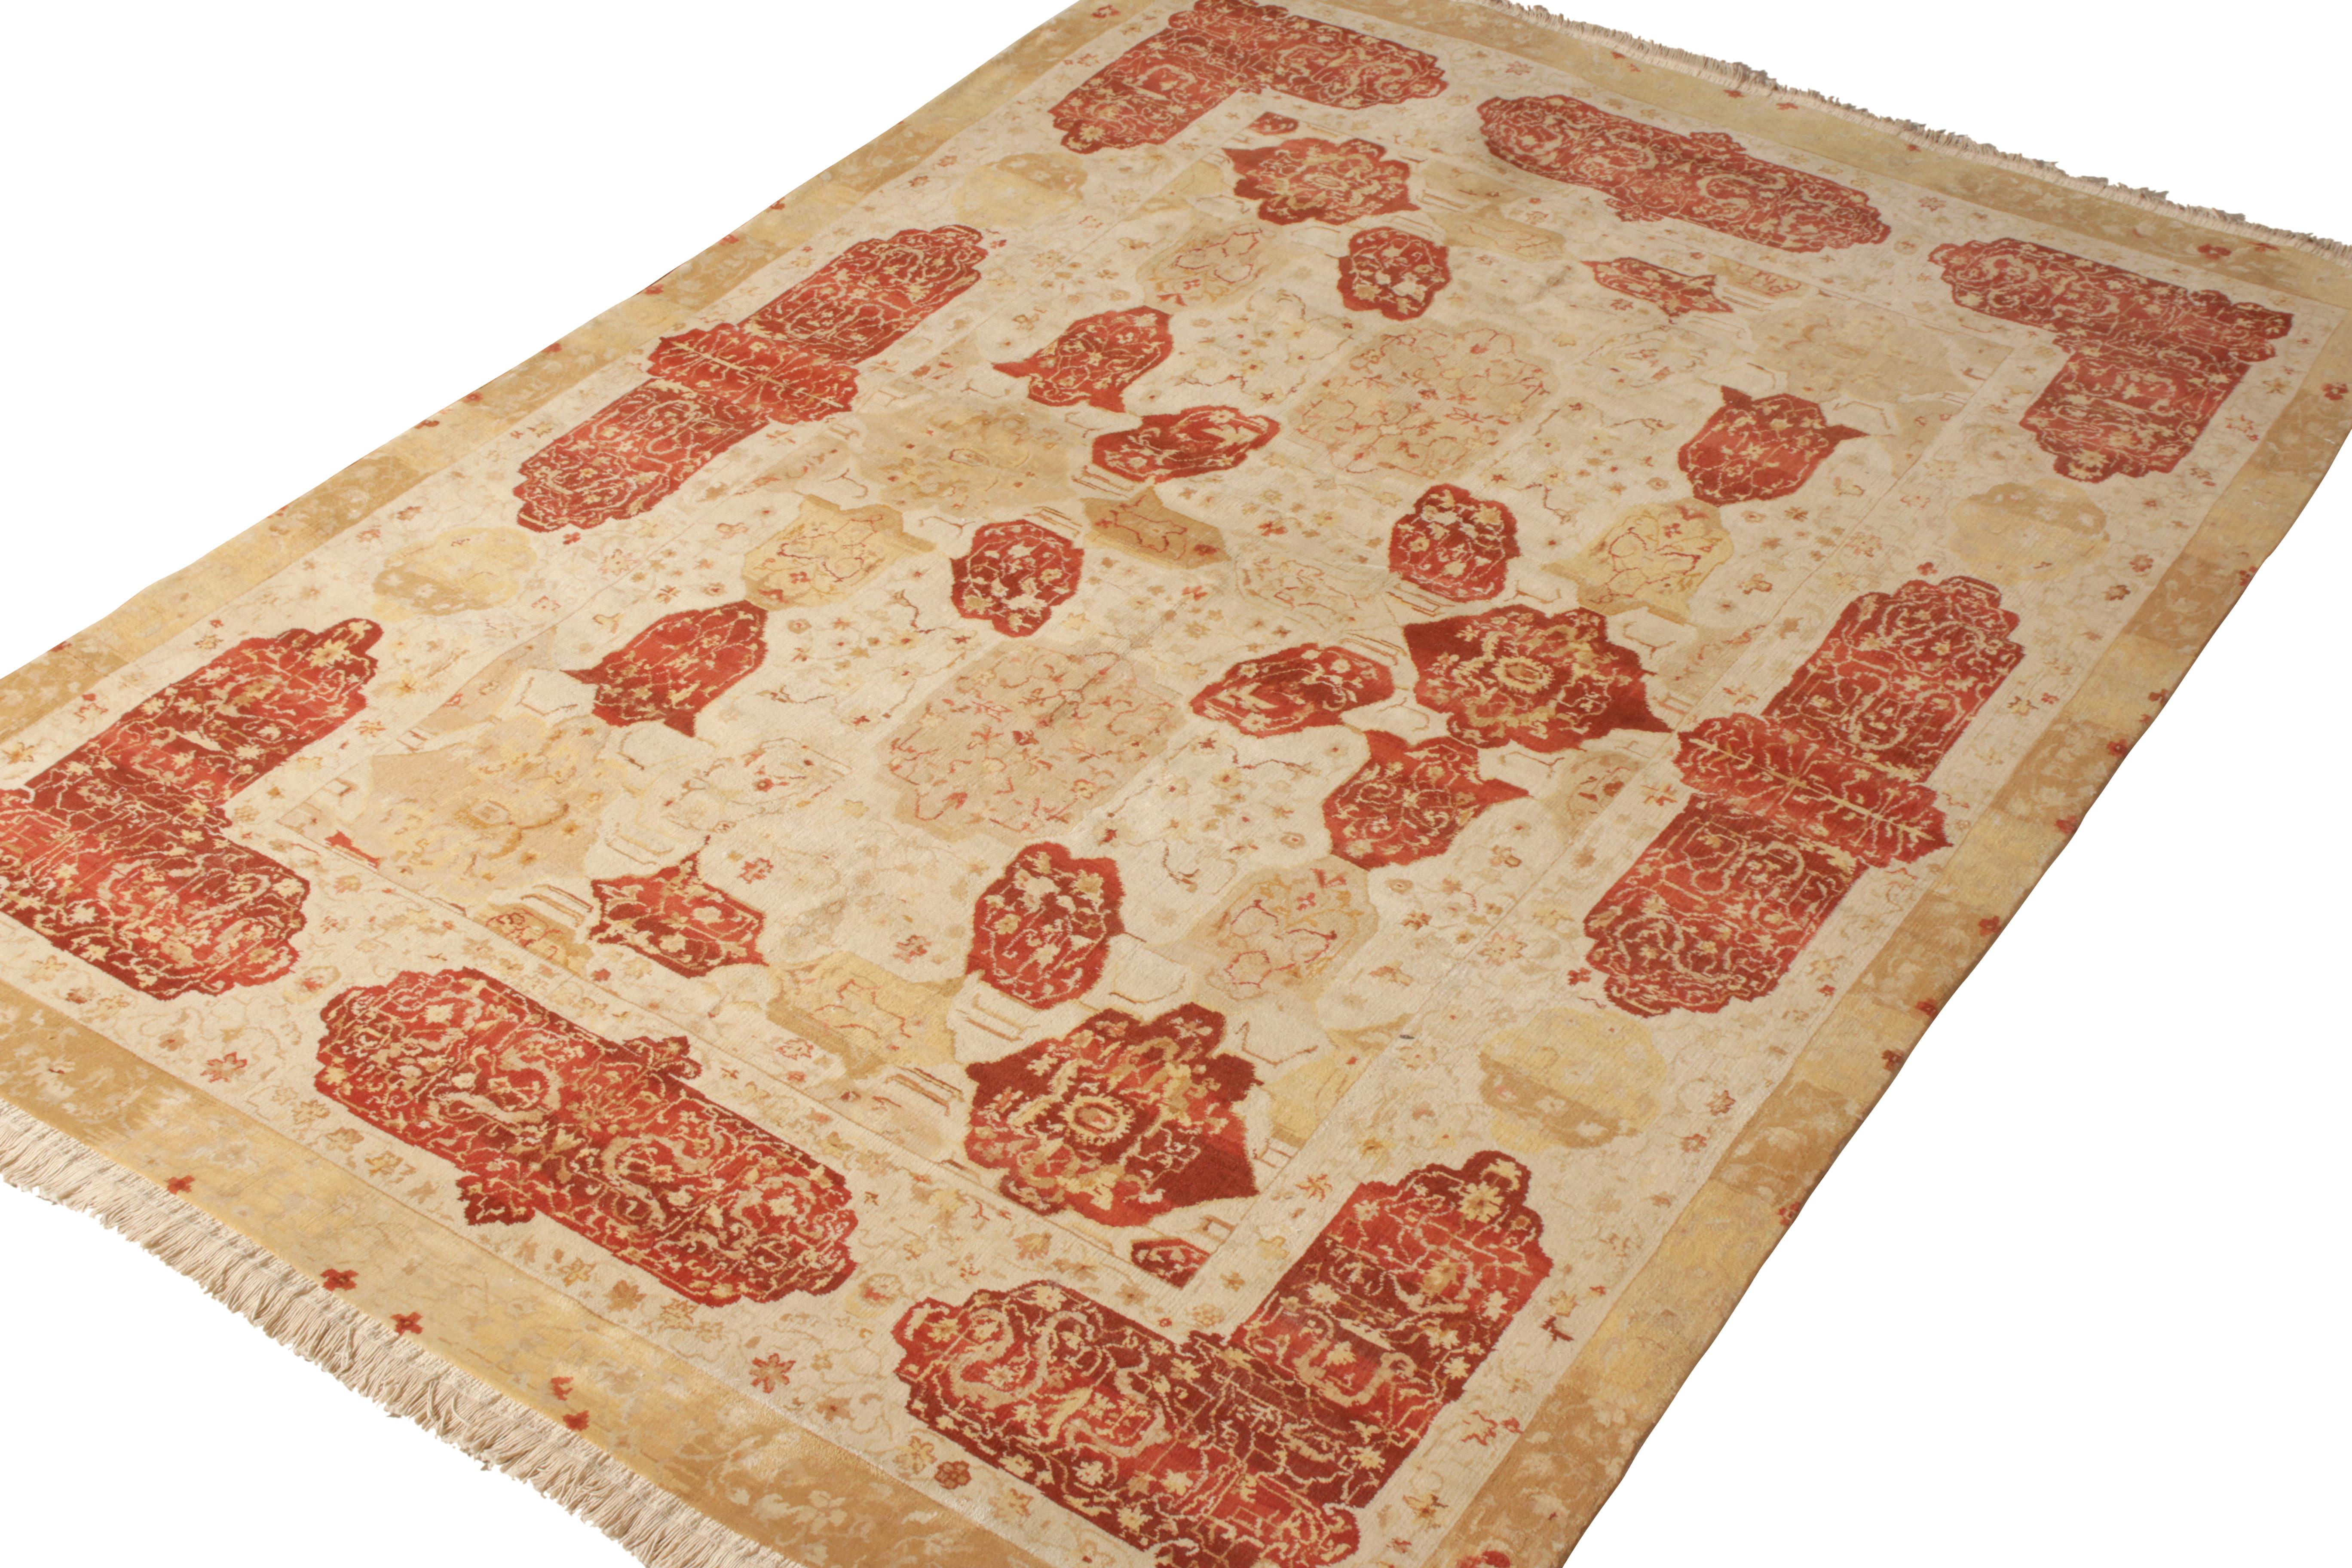 Modern Rug & Kilim’s Classic Agra style rug in Beige-Brown and Red Floral Cartouches For Sale